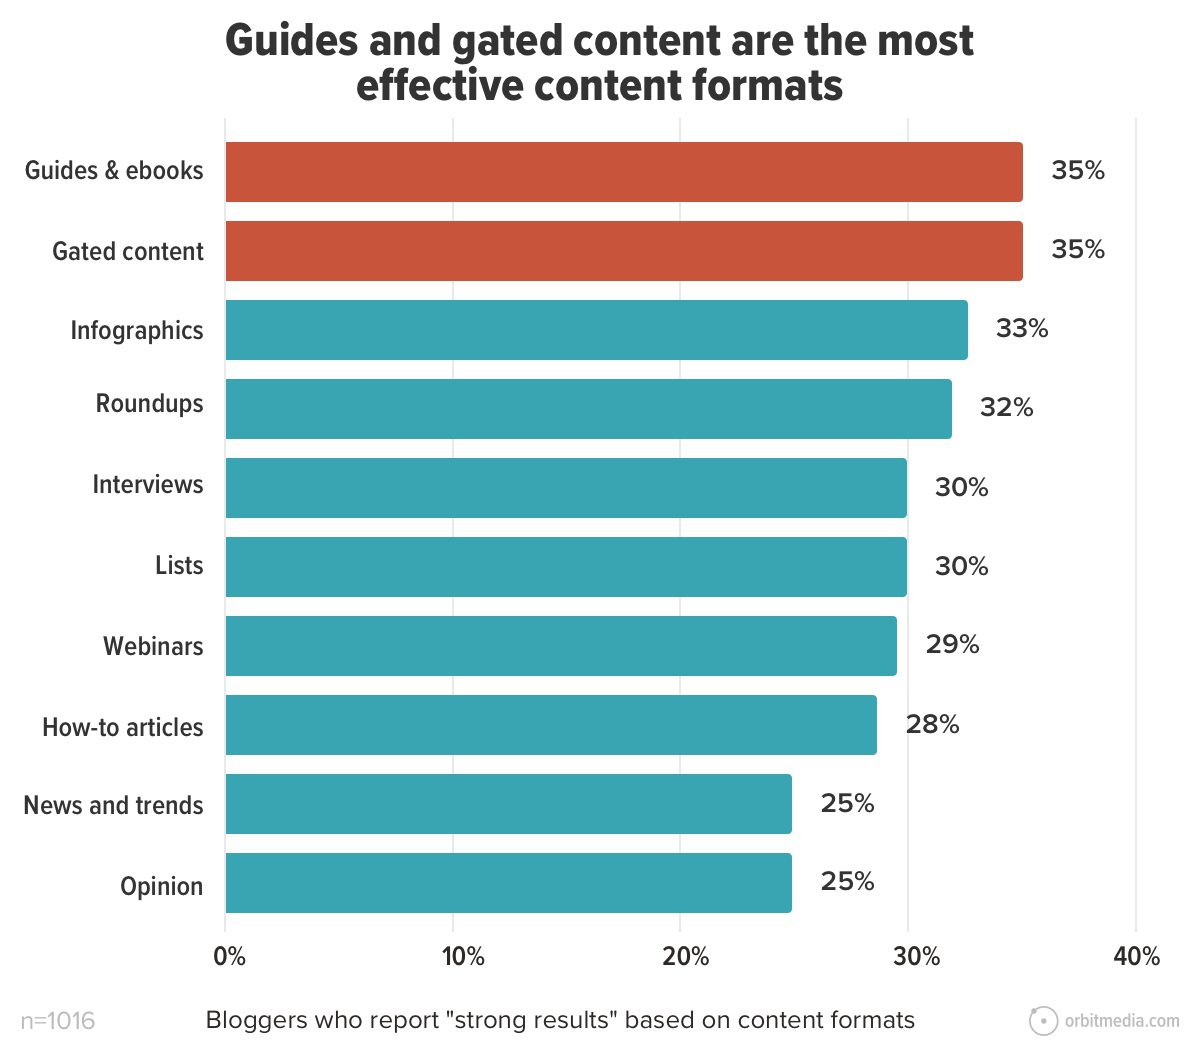 bar chart showing that guides, ebooks, and gated content are the most effective